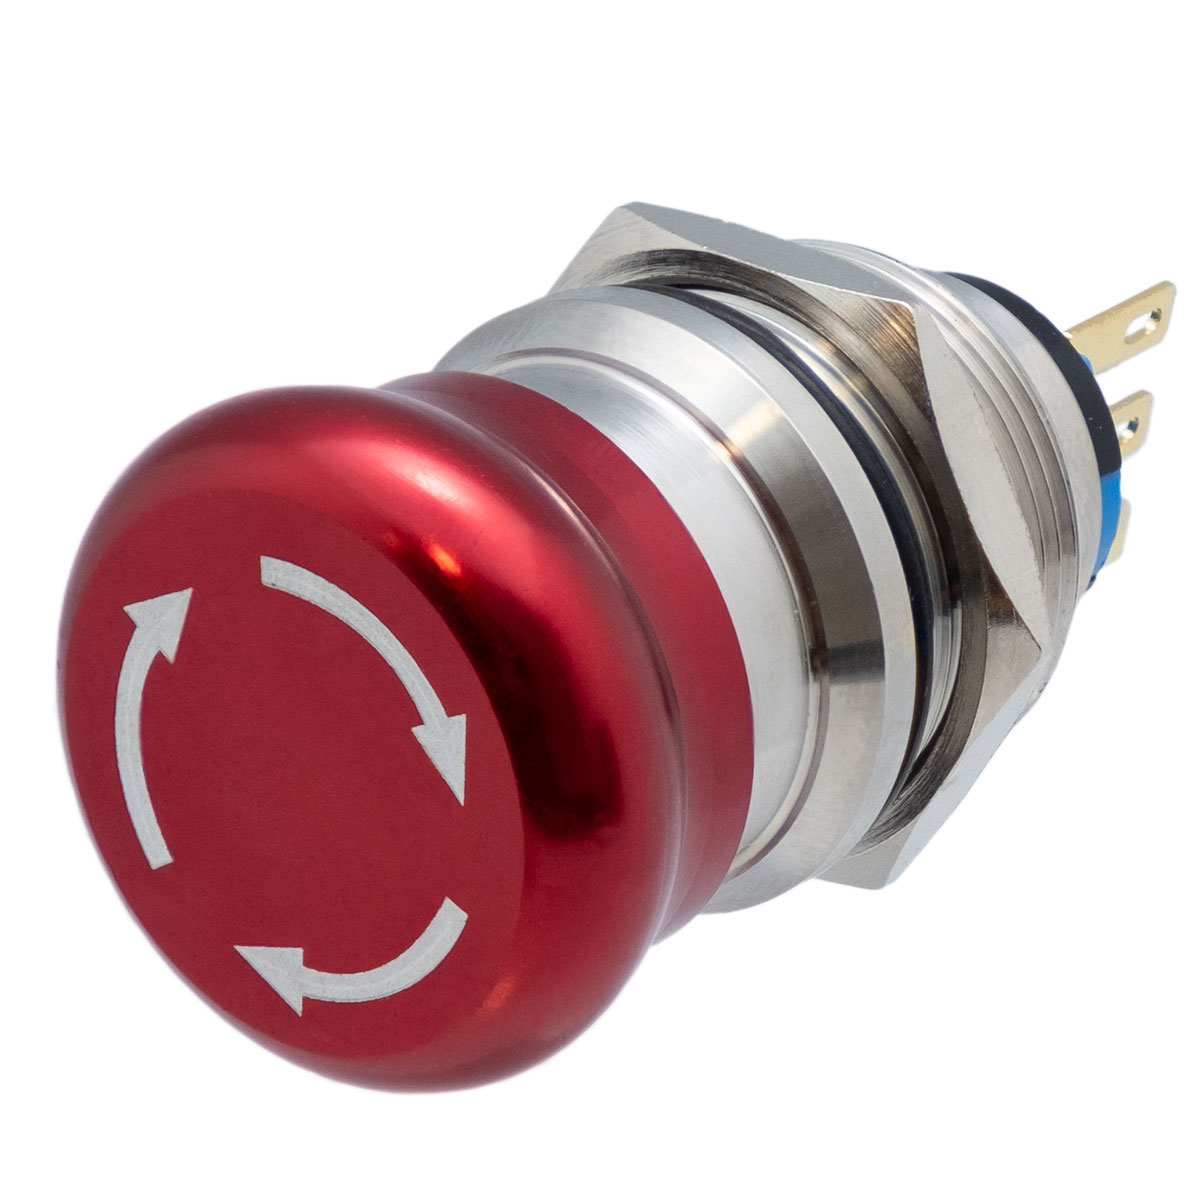 Emergency switch 24.5mm, stainless steel 19mm DPDT